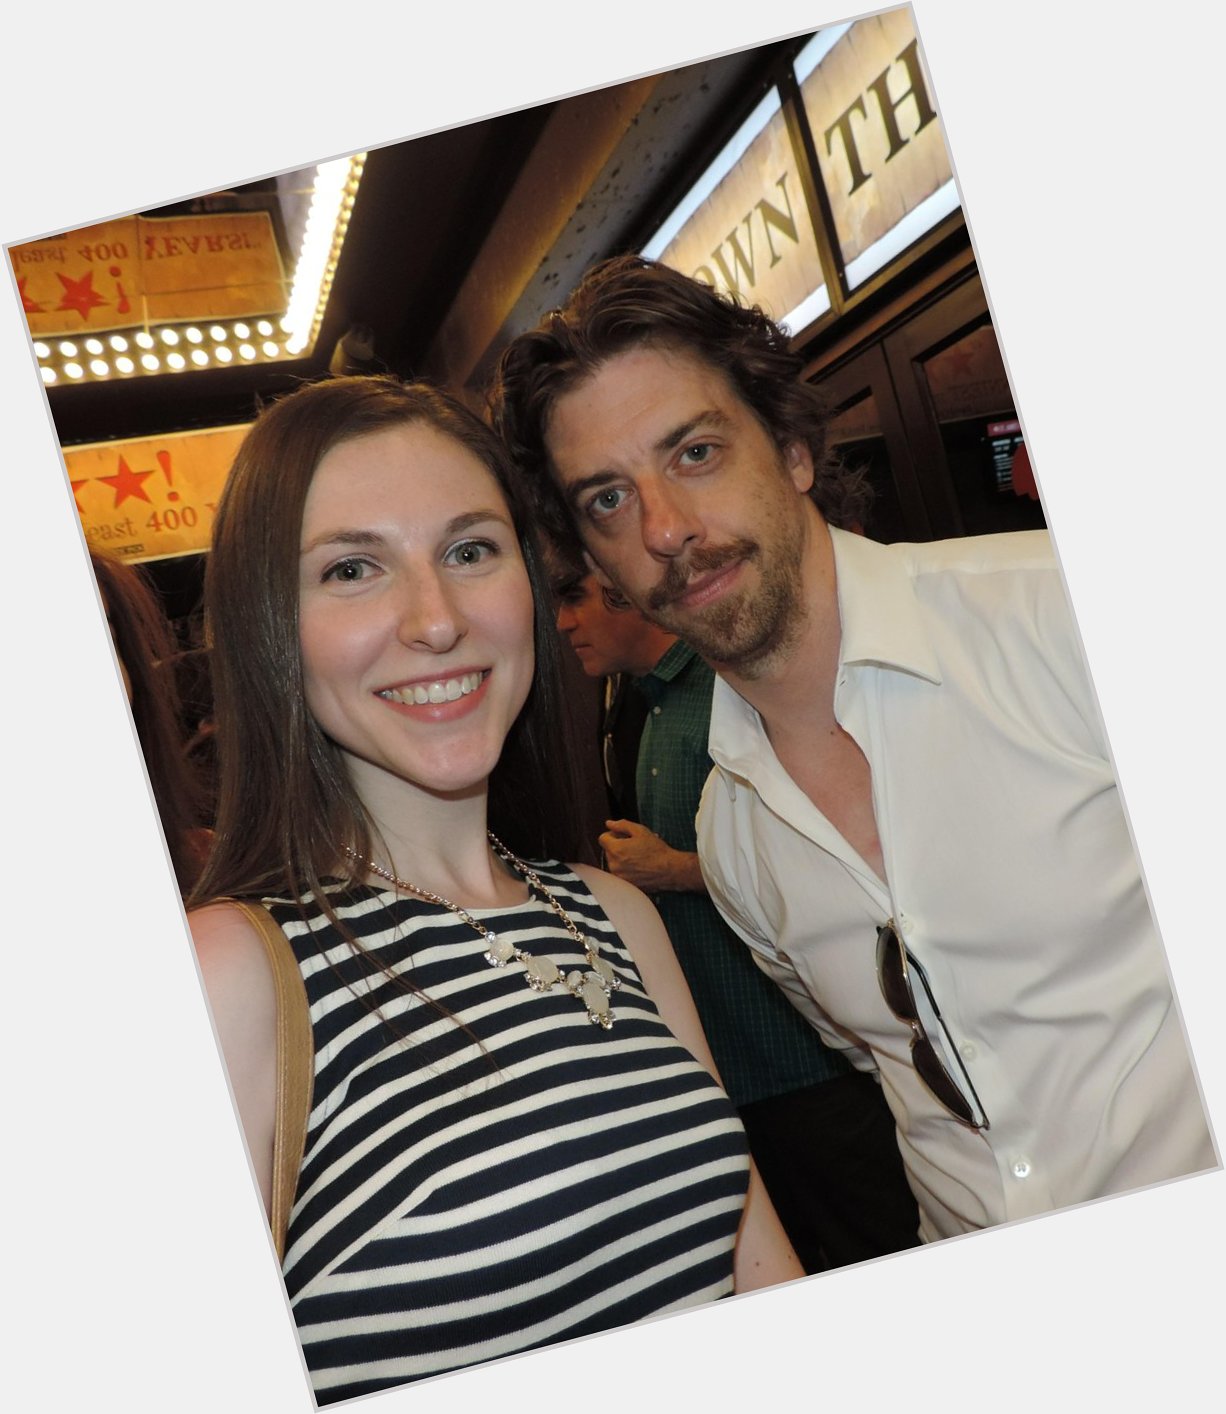 Happy Birthday Christian Borle! Had a great time seeing him on stage a few days after the Tonys this year! 